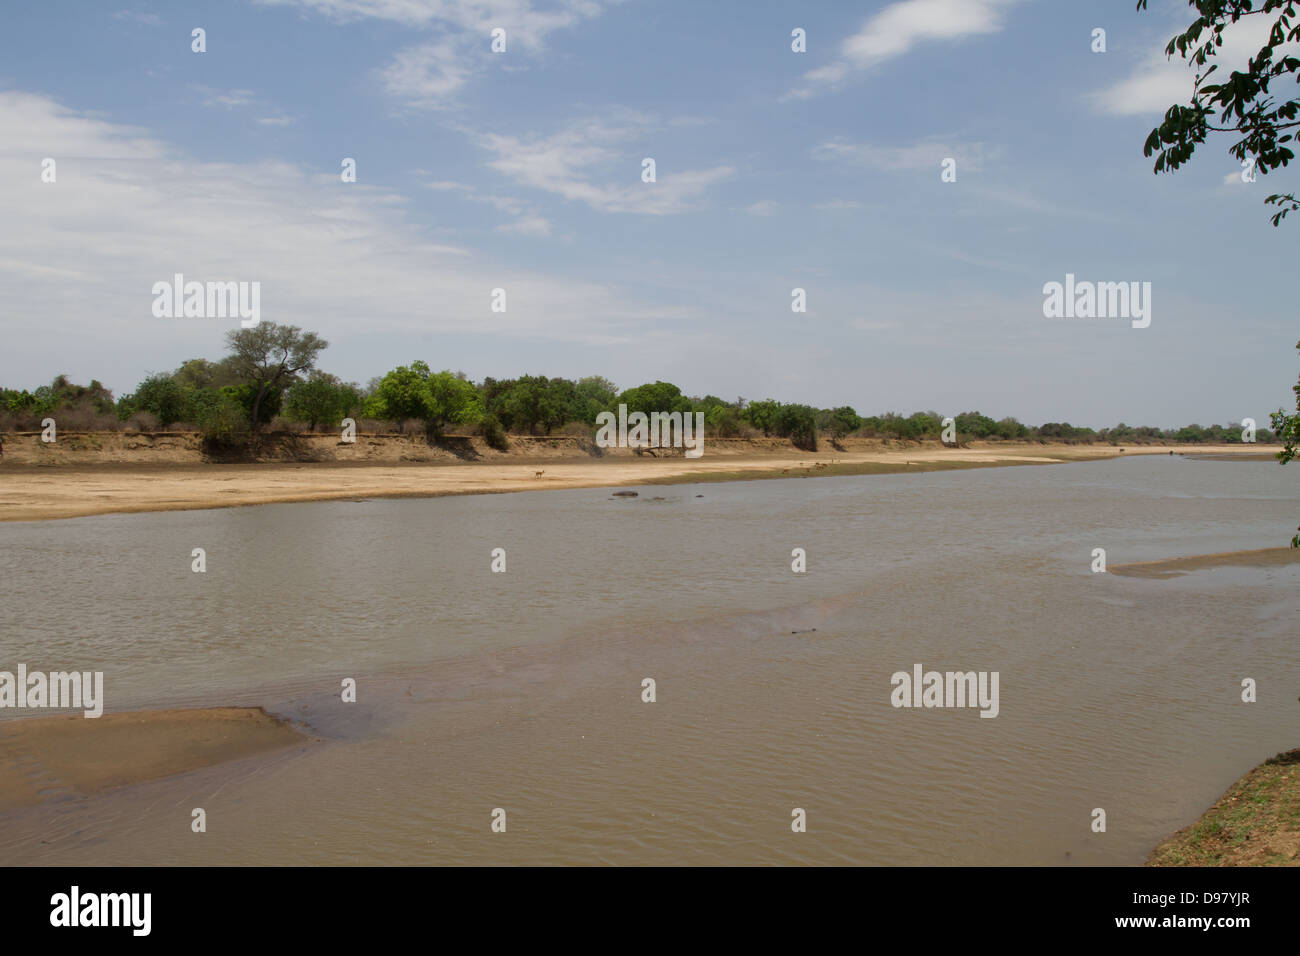 Views over the Luangwa River Stock Photo